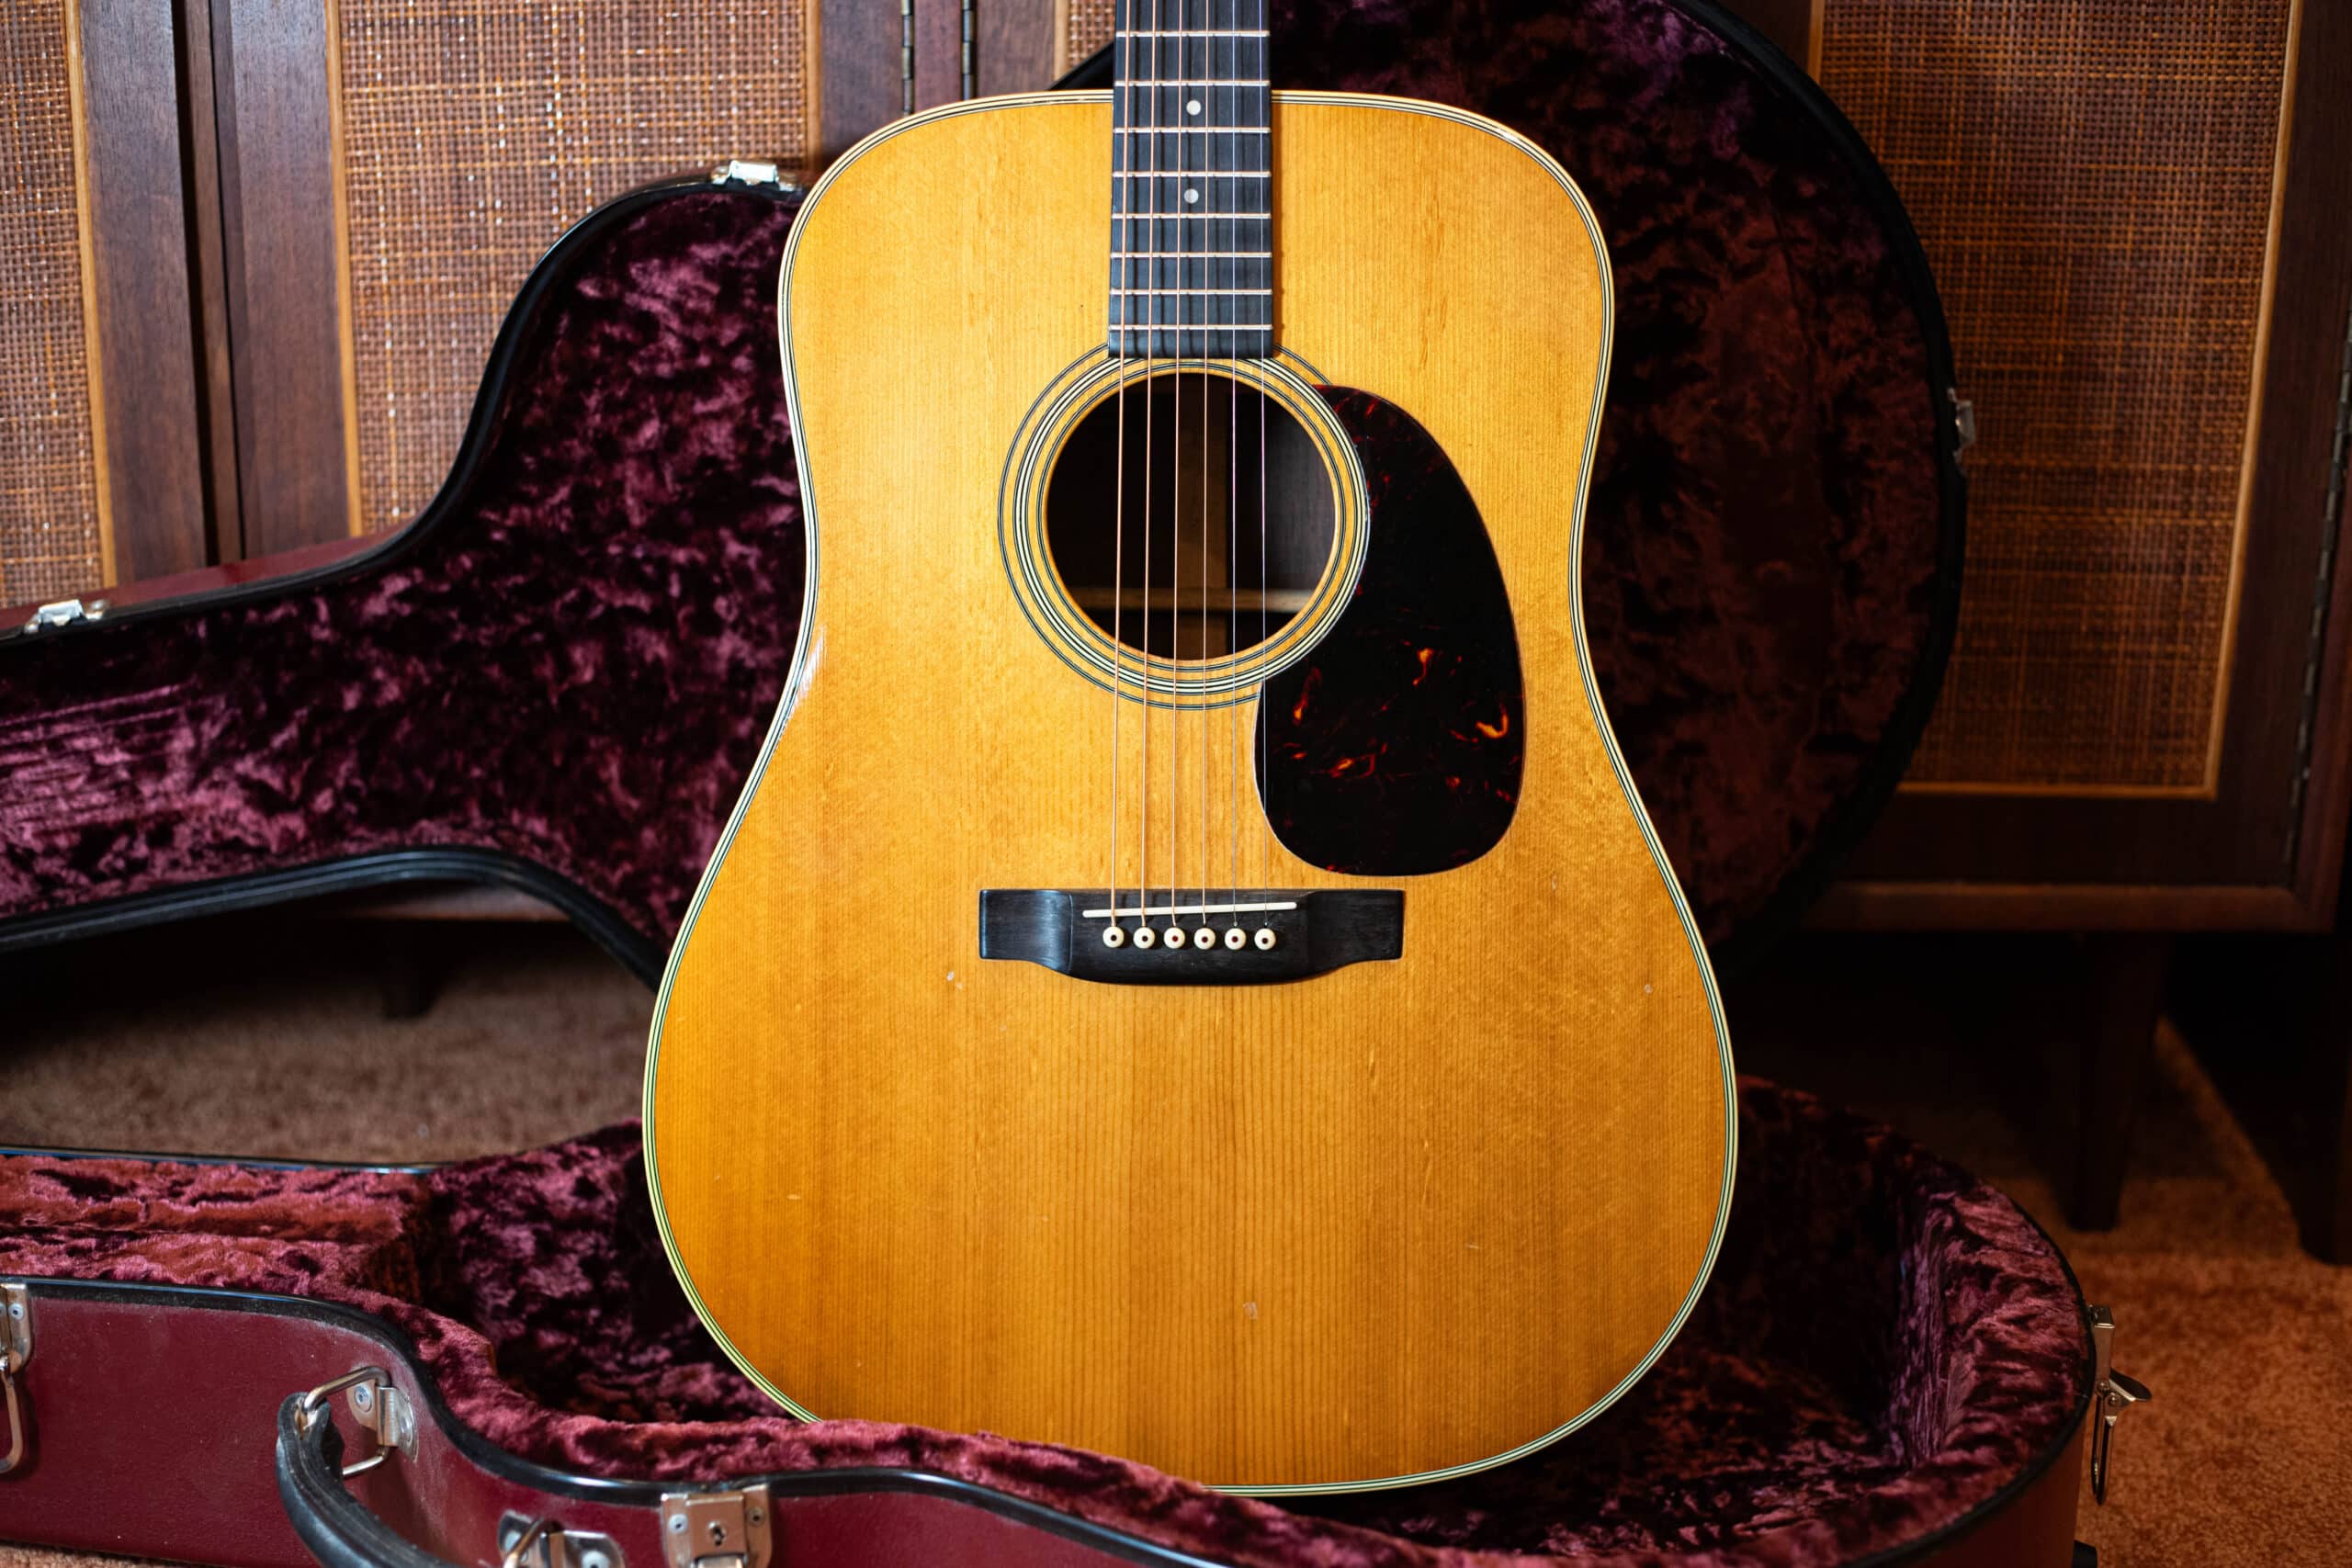 The front of the 1966 Martin D-28.